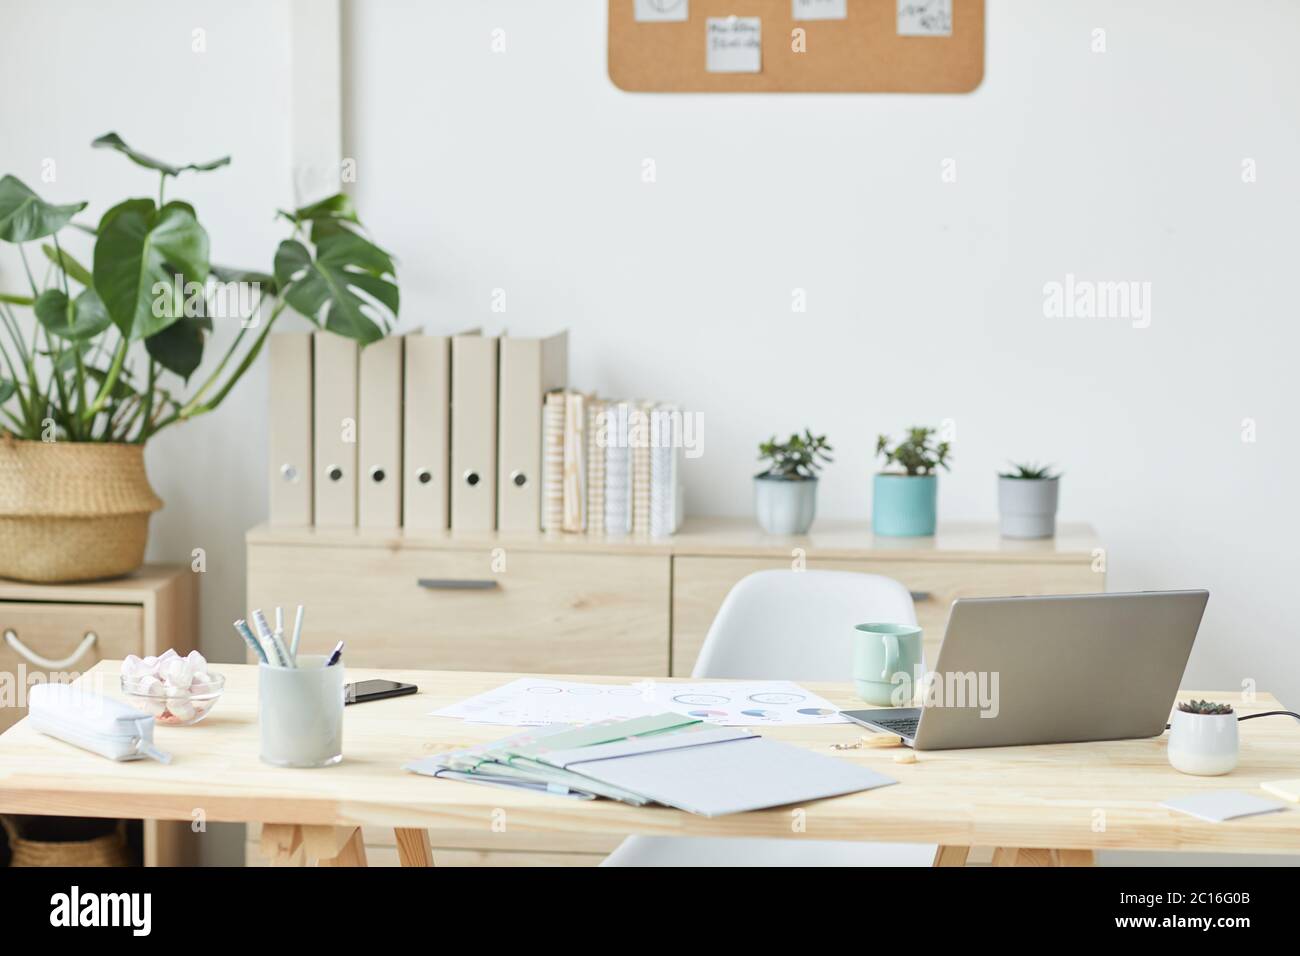 Minimal background image of clean home office interior with wooden desk and laptop, copy space Stock Photo